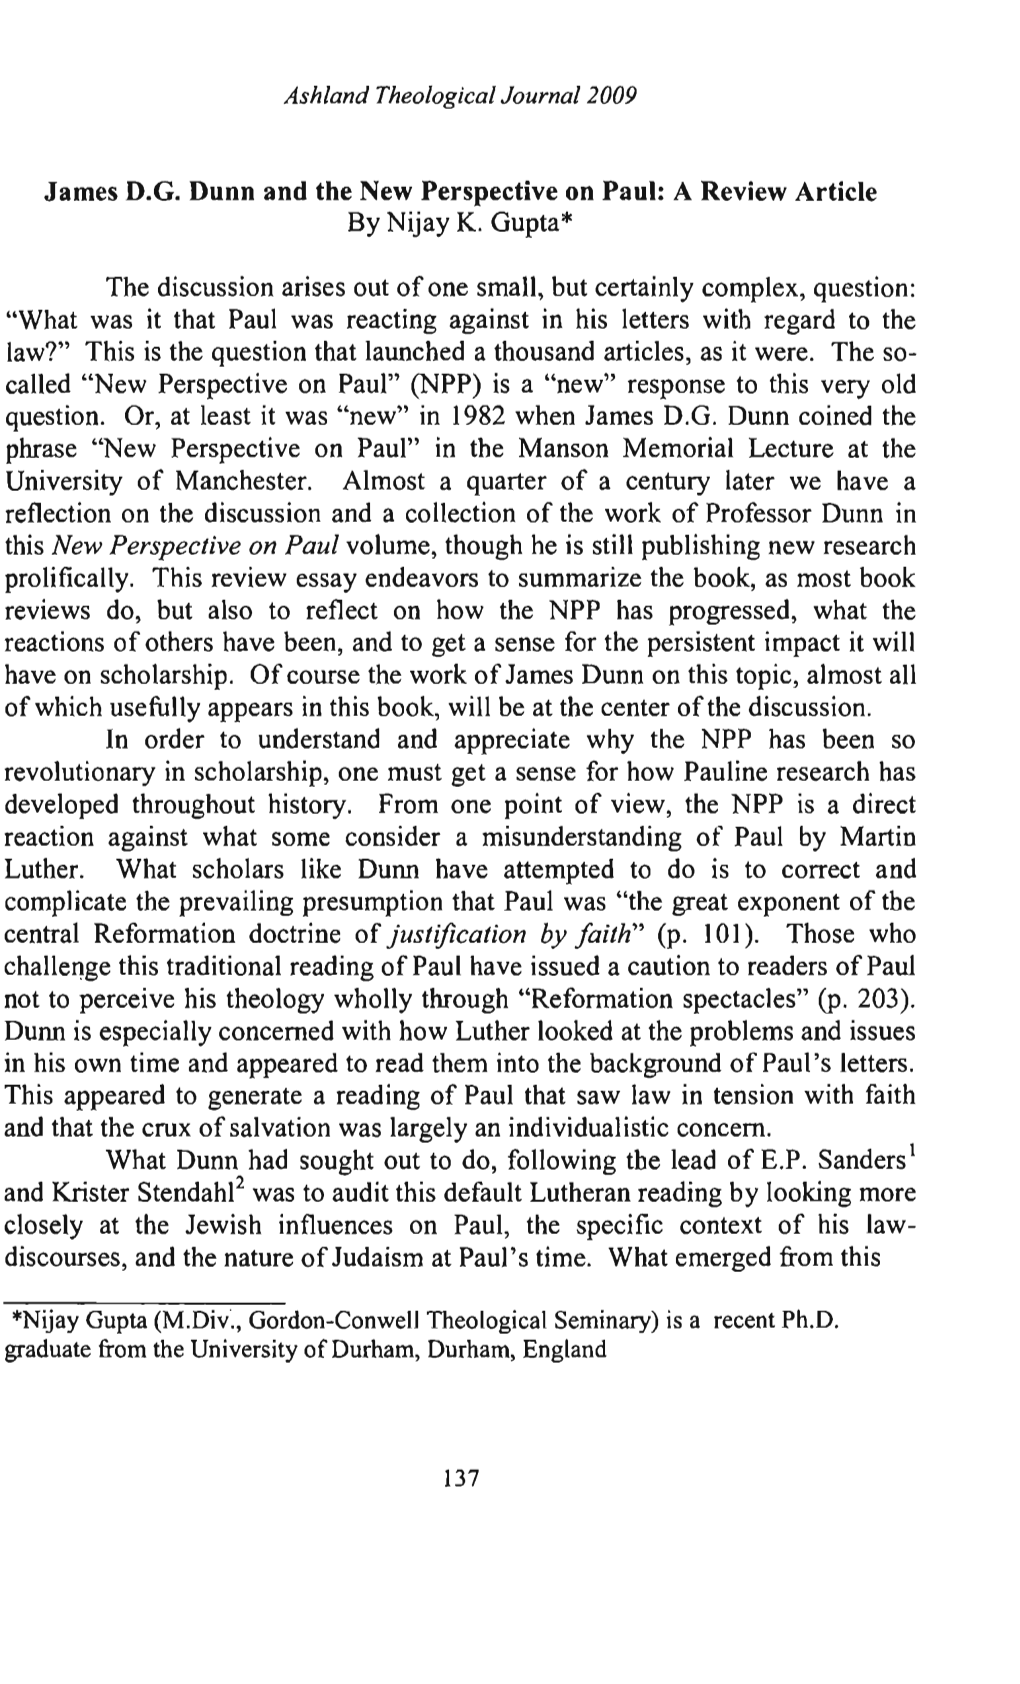 James D.G. Dunn and the New Perspective on Paul: a Review Article by Nijay K